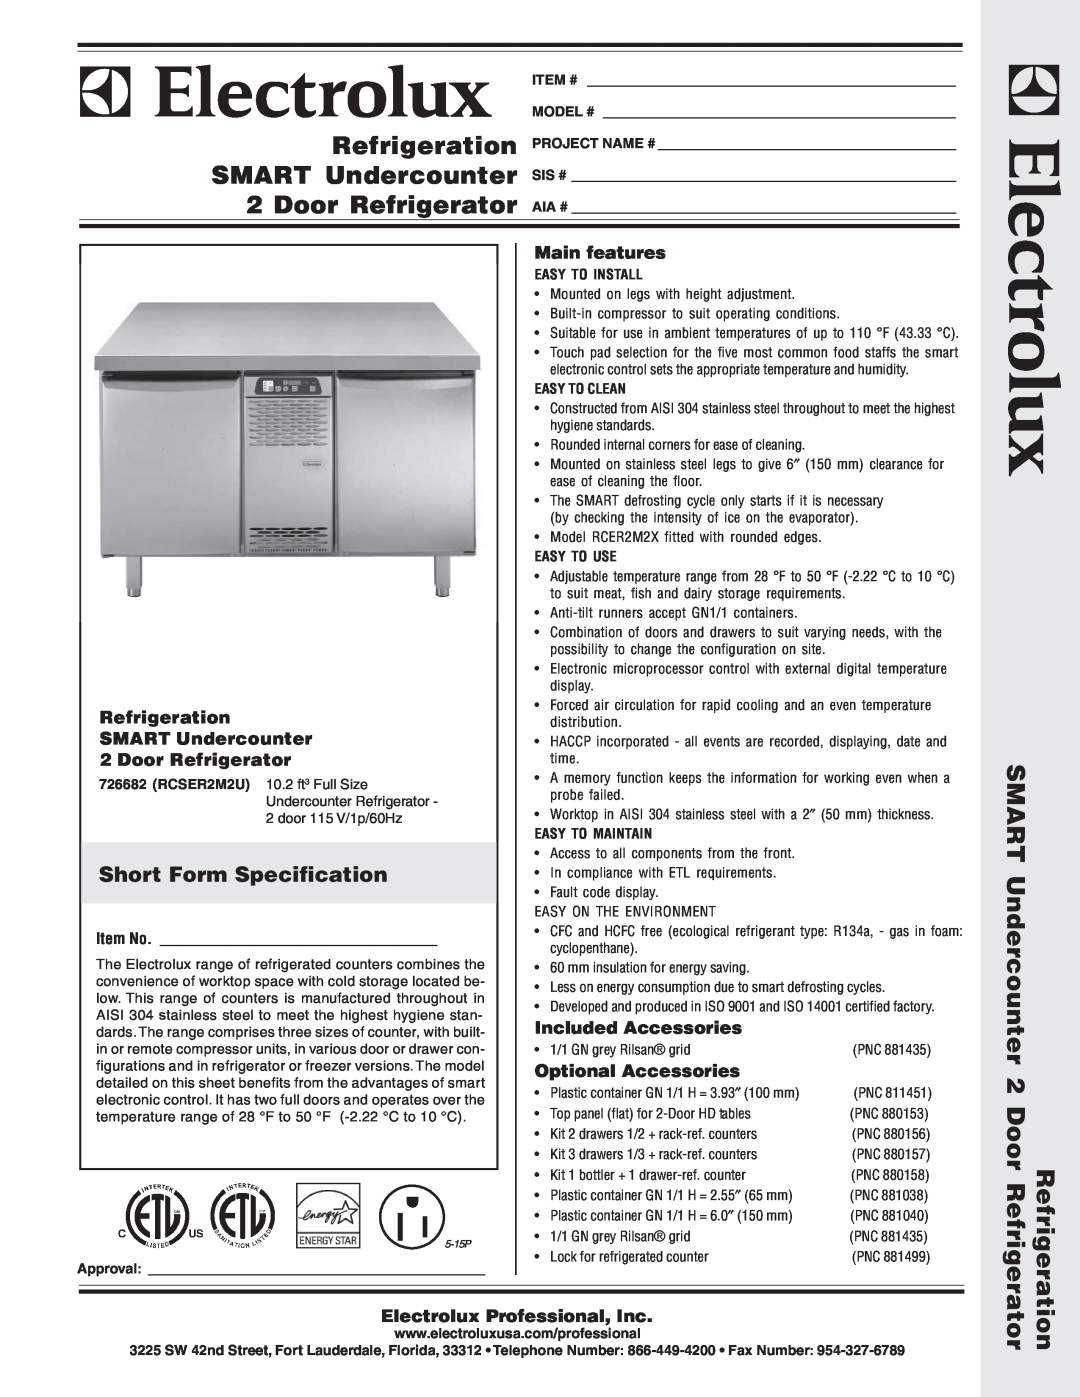 Electrolux RCER2M2X manual Short Form Specification, Main features, Refrigeration, SMART Undercounter, Door Refrigerator 